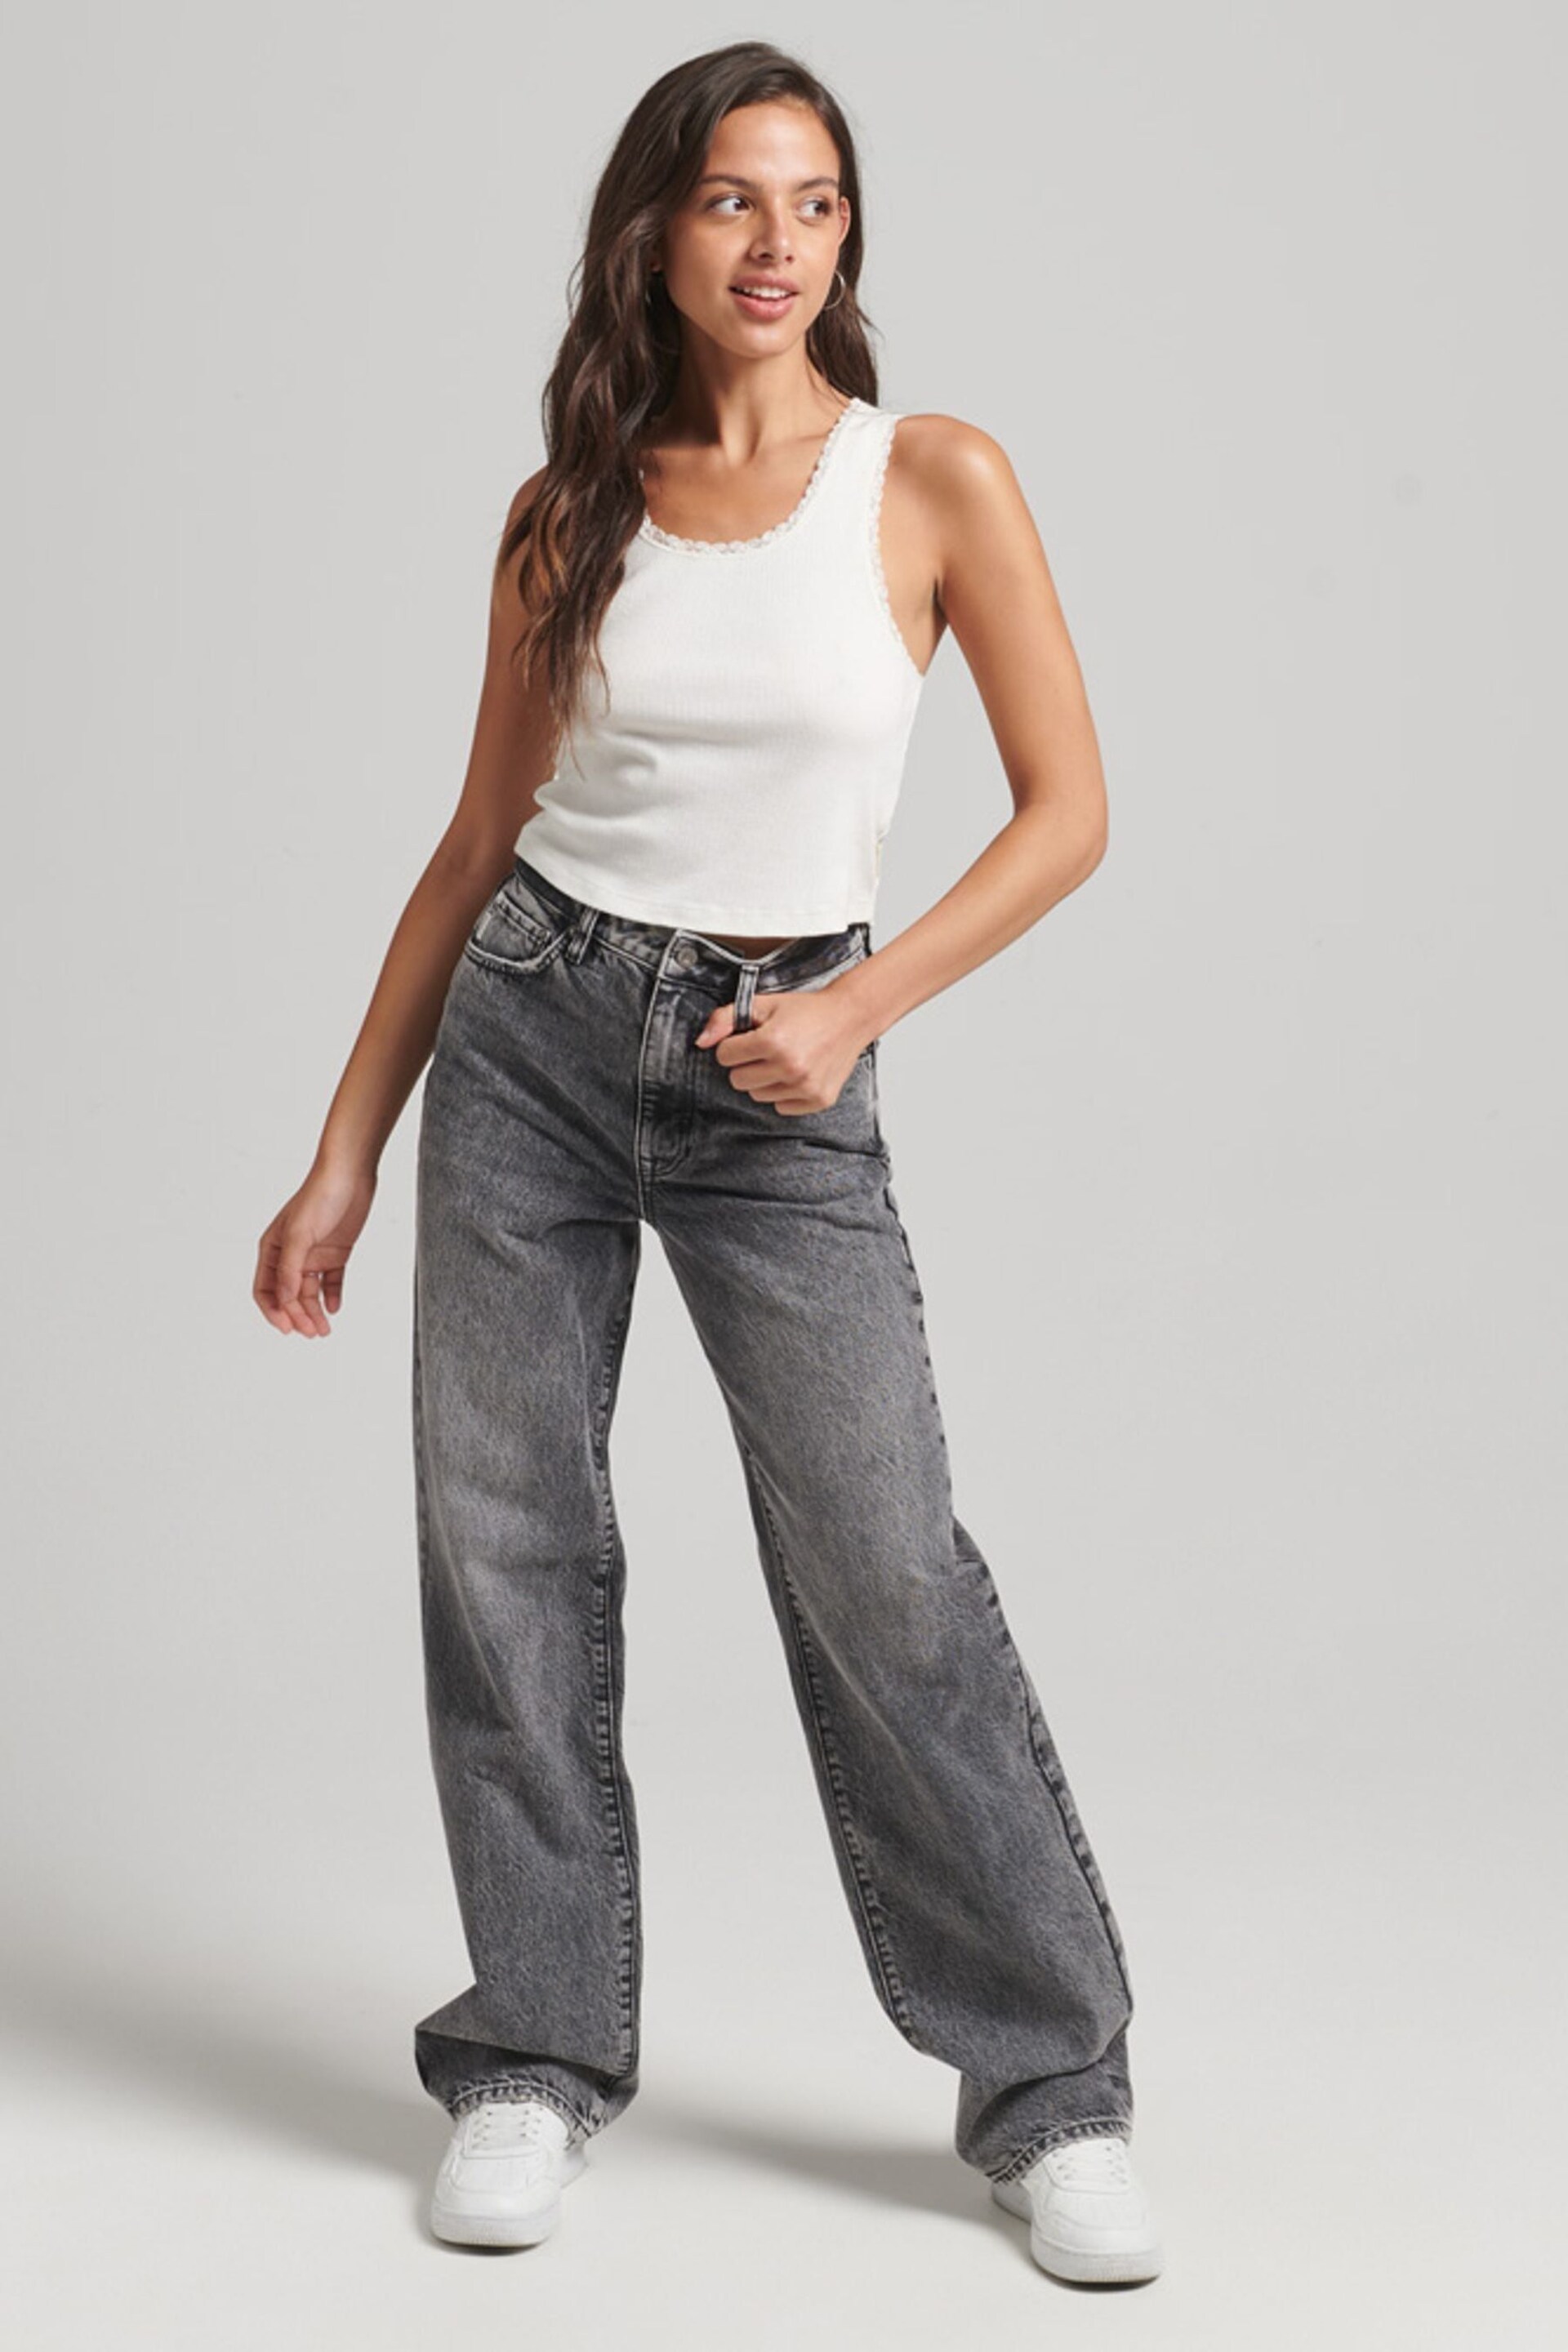 Superdry Grey Organic Cotton Wide Leg Jeans - Image 3 of 5